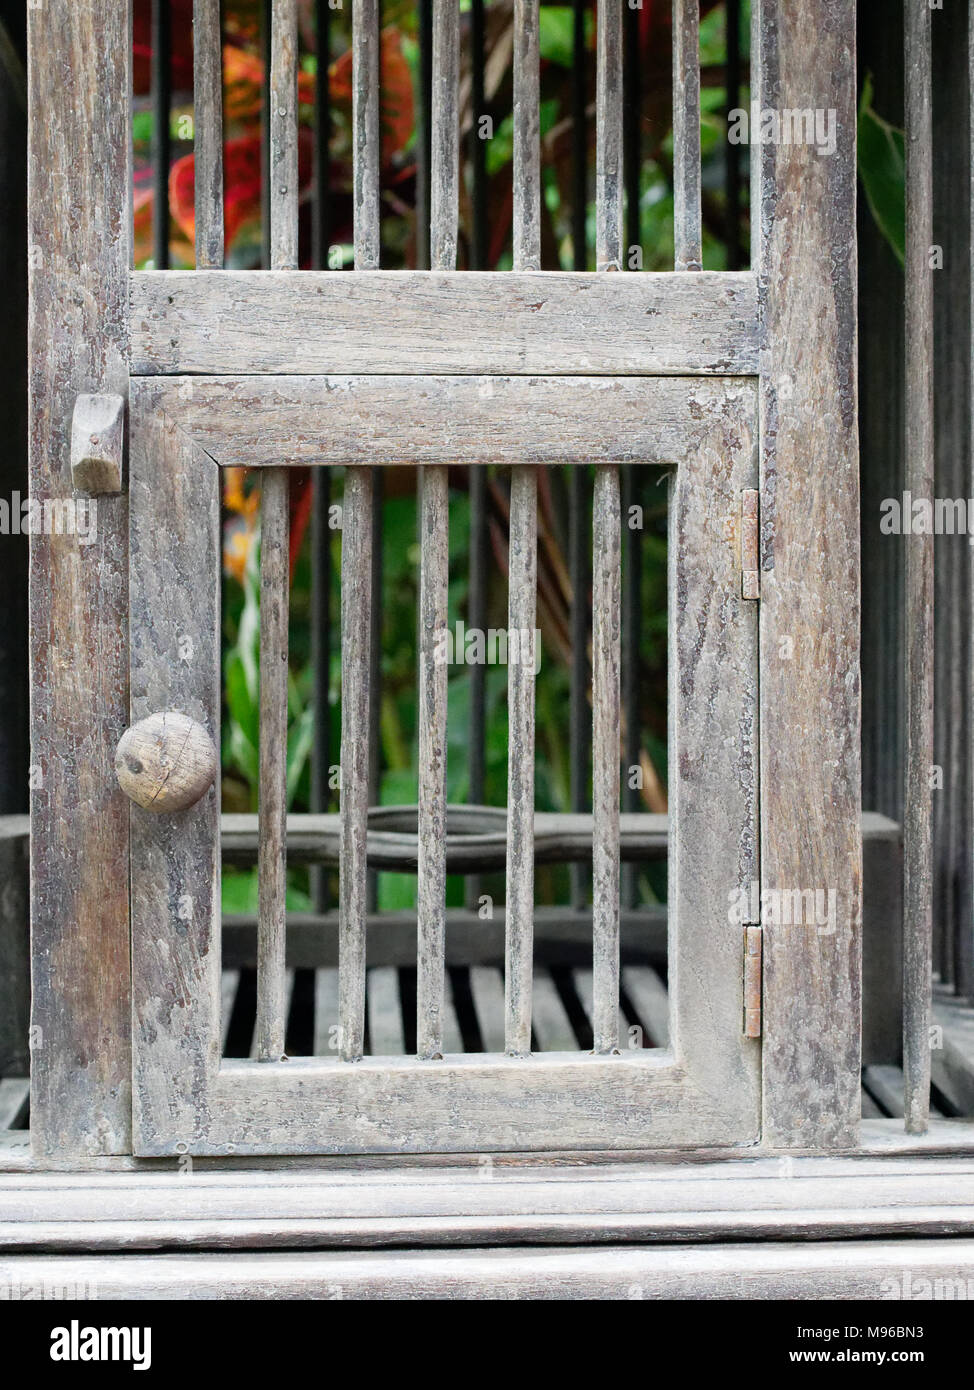 Door of empty wooden bird cage in retro style show concepts of entrance, taking chance, security, conceptual and imagination block, and trap Stock Photo